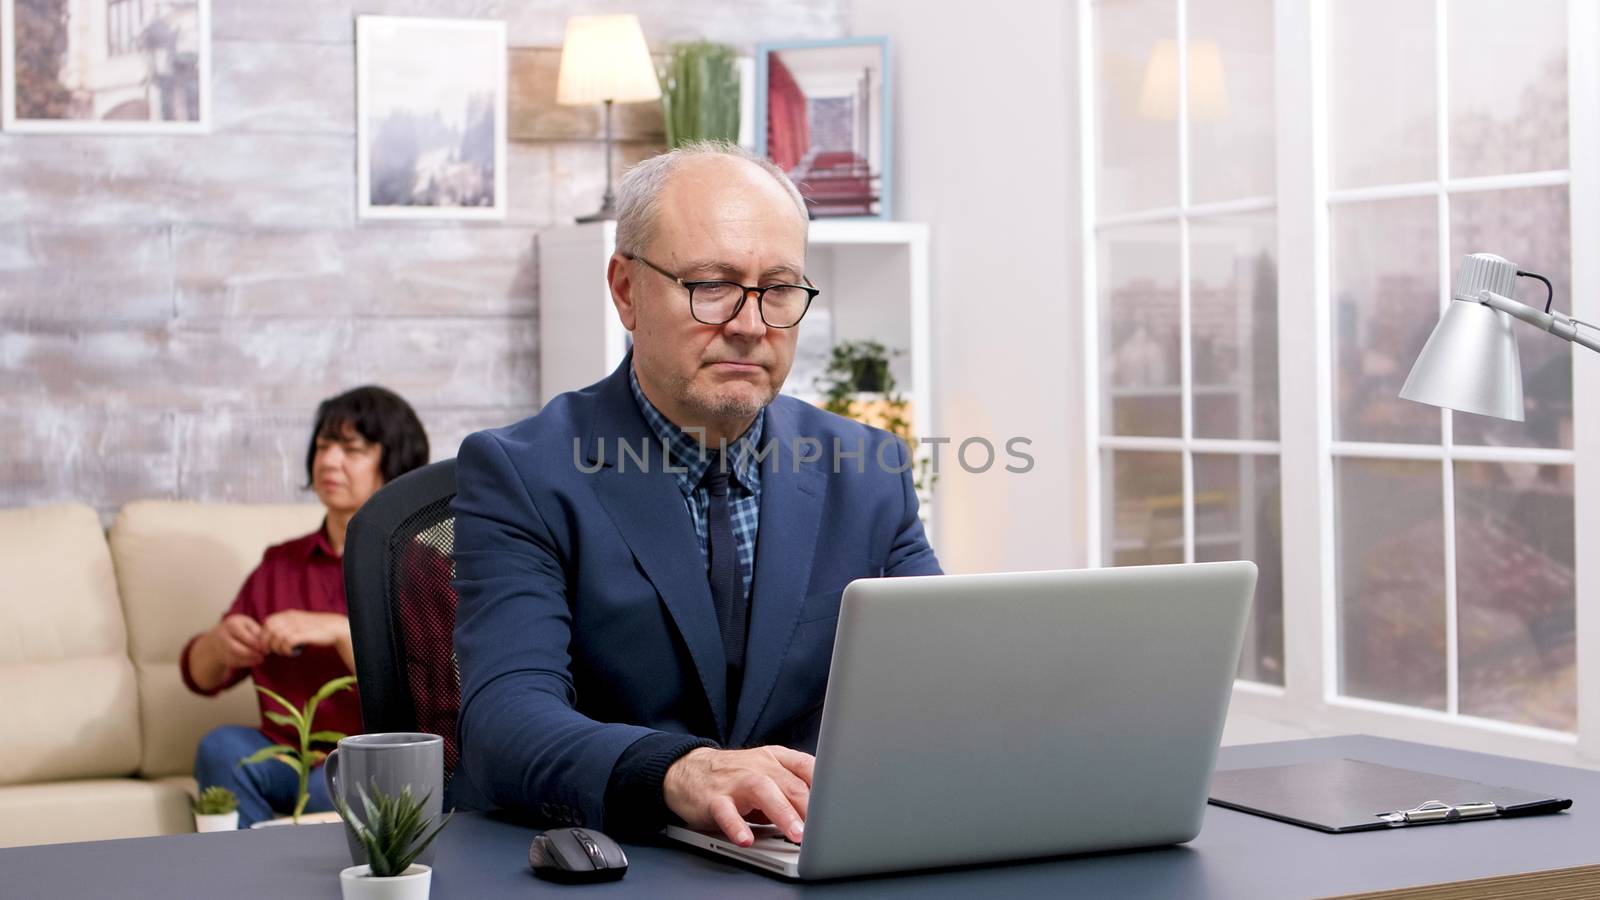 Old man working on laptop and taking a sip of coffee in living room with wife sitting on sofa in the background.